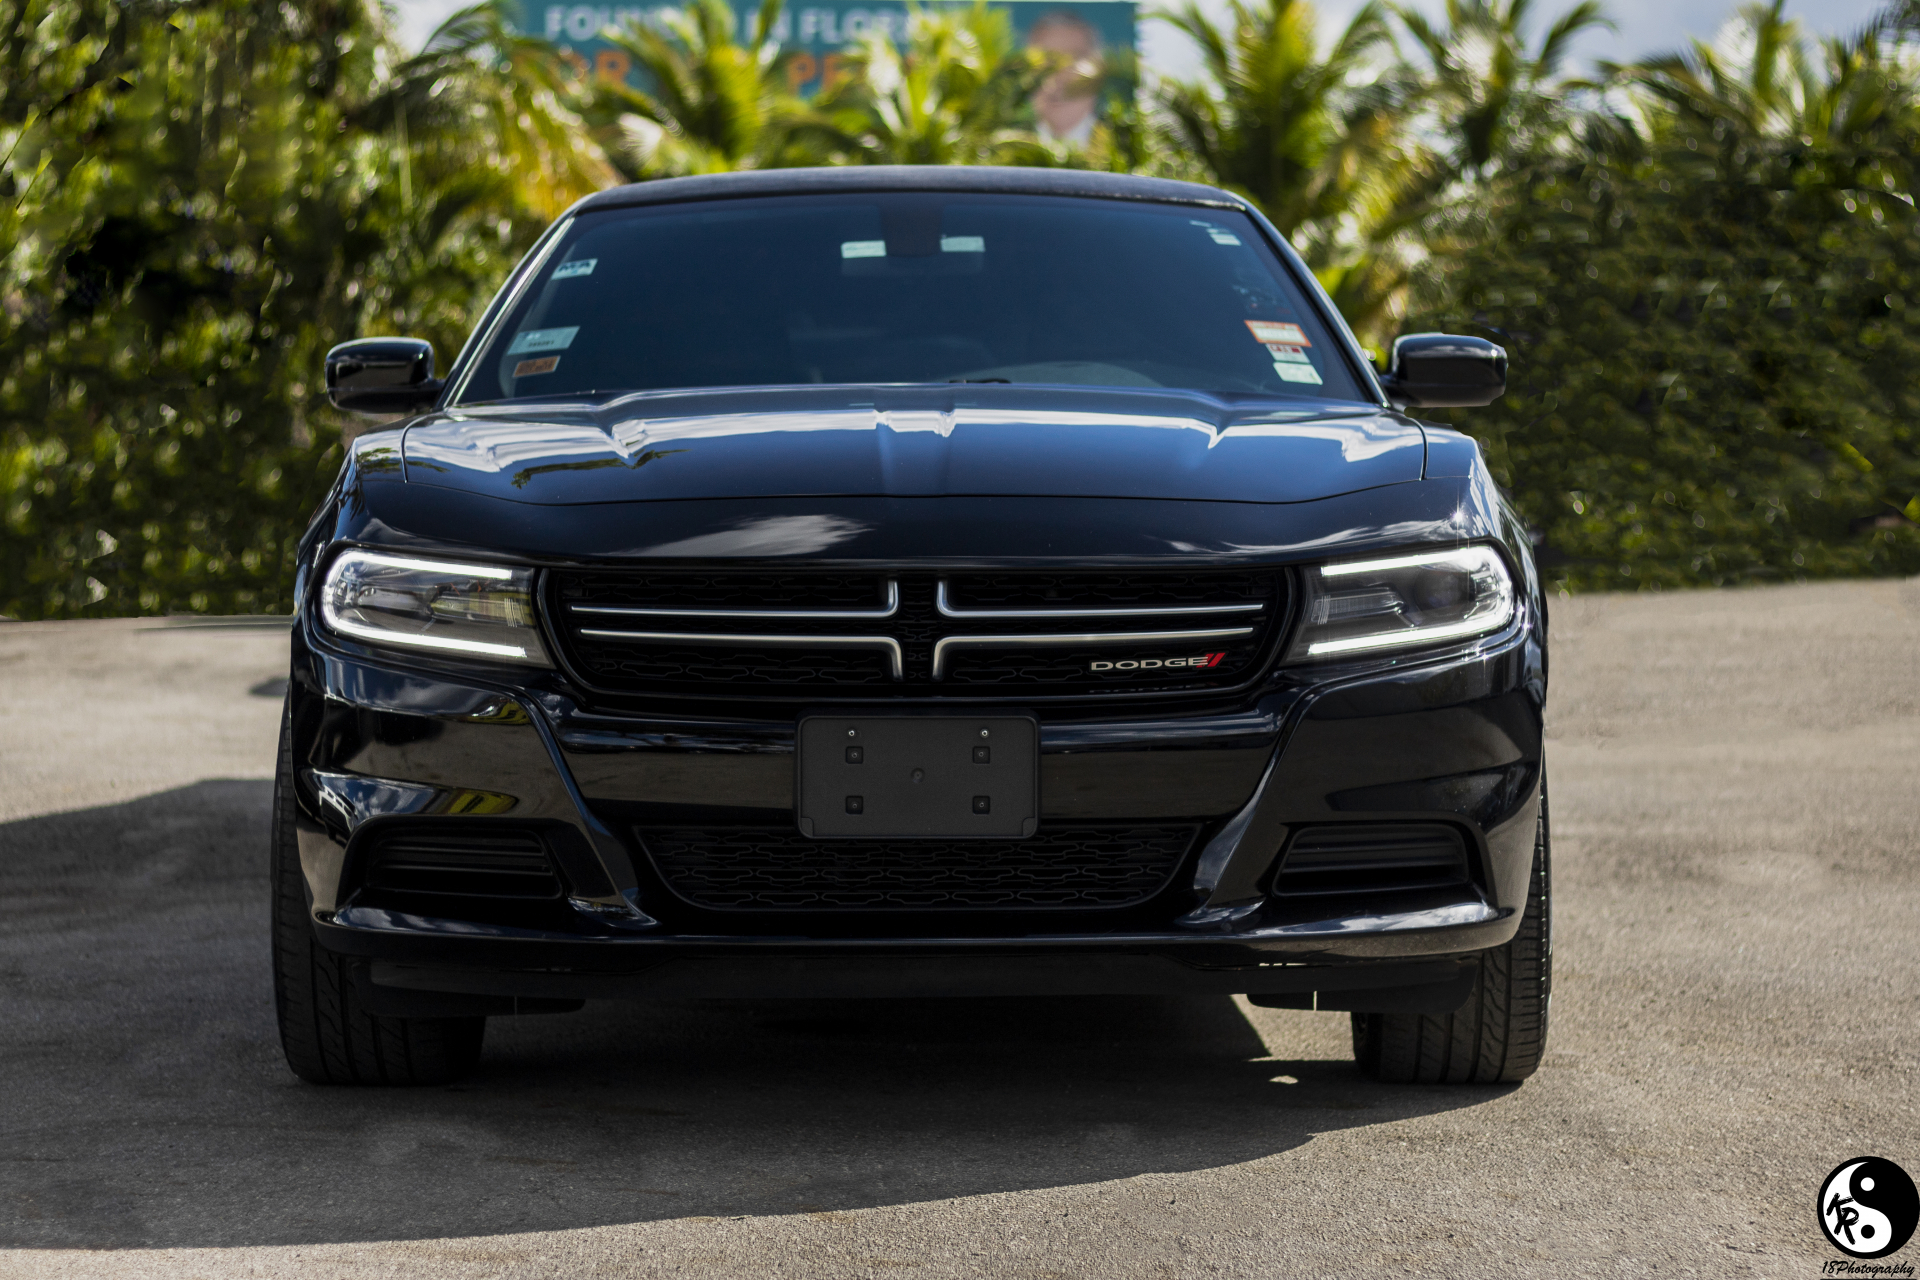 NEW 2016 Dodge Charger Black Panther
Limo /
Key West, FL 33040

 / Hourly $0.00
